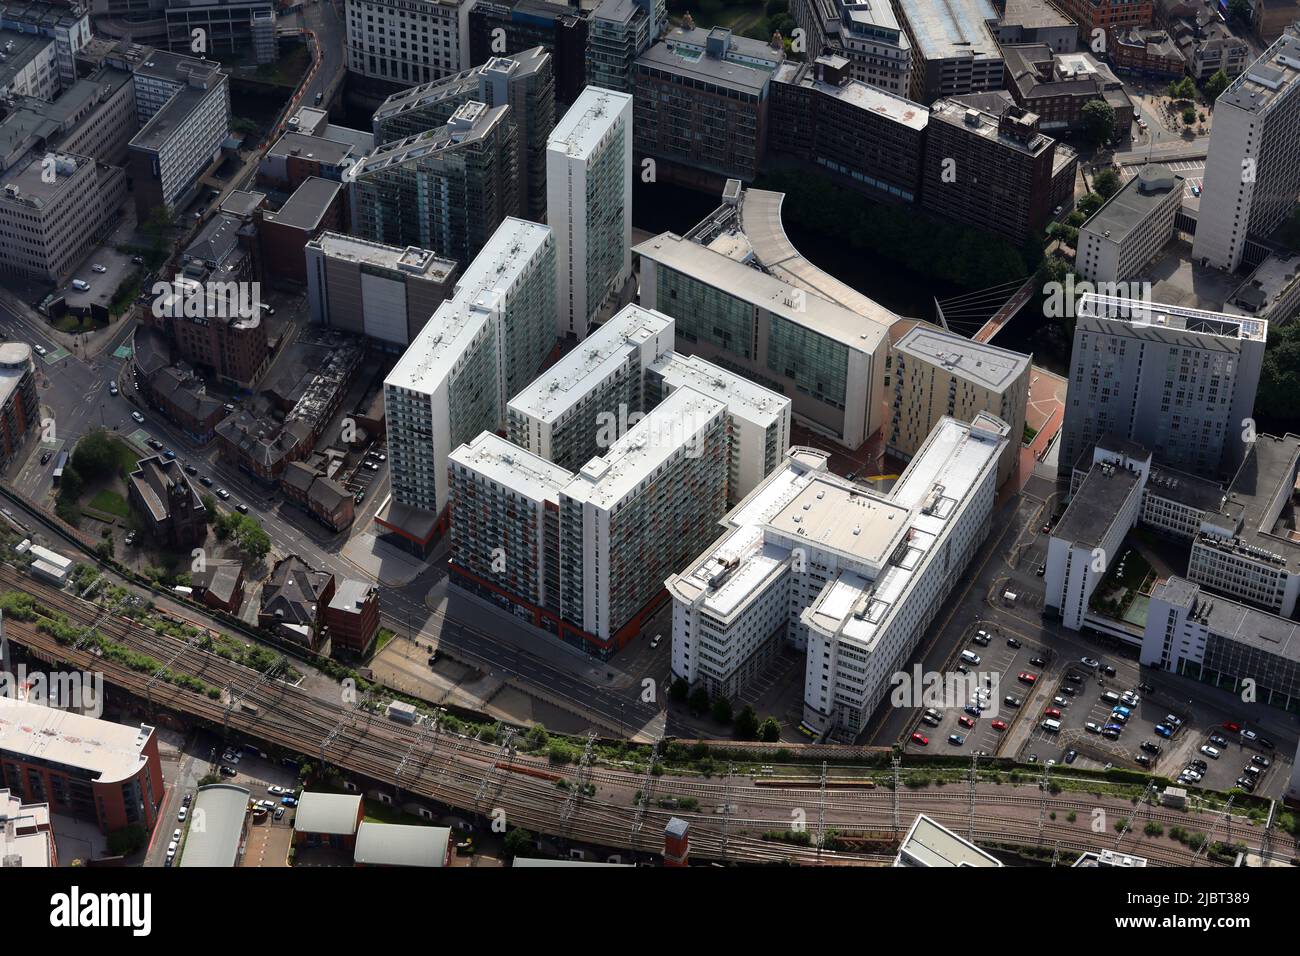 aerial view of Trinity Bridge House tax office; Alcock House, Chapman House & Bradshaw House apartment buildings, Salford, Manchester Stock Photo